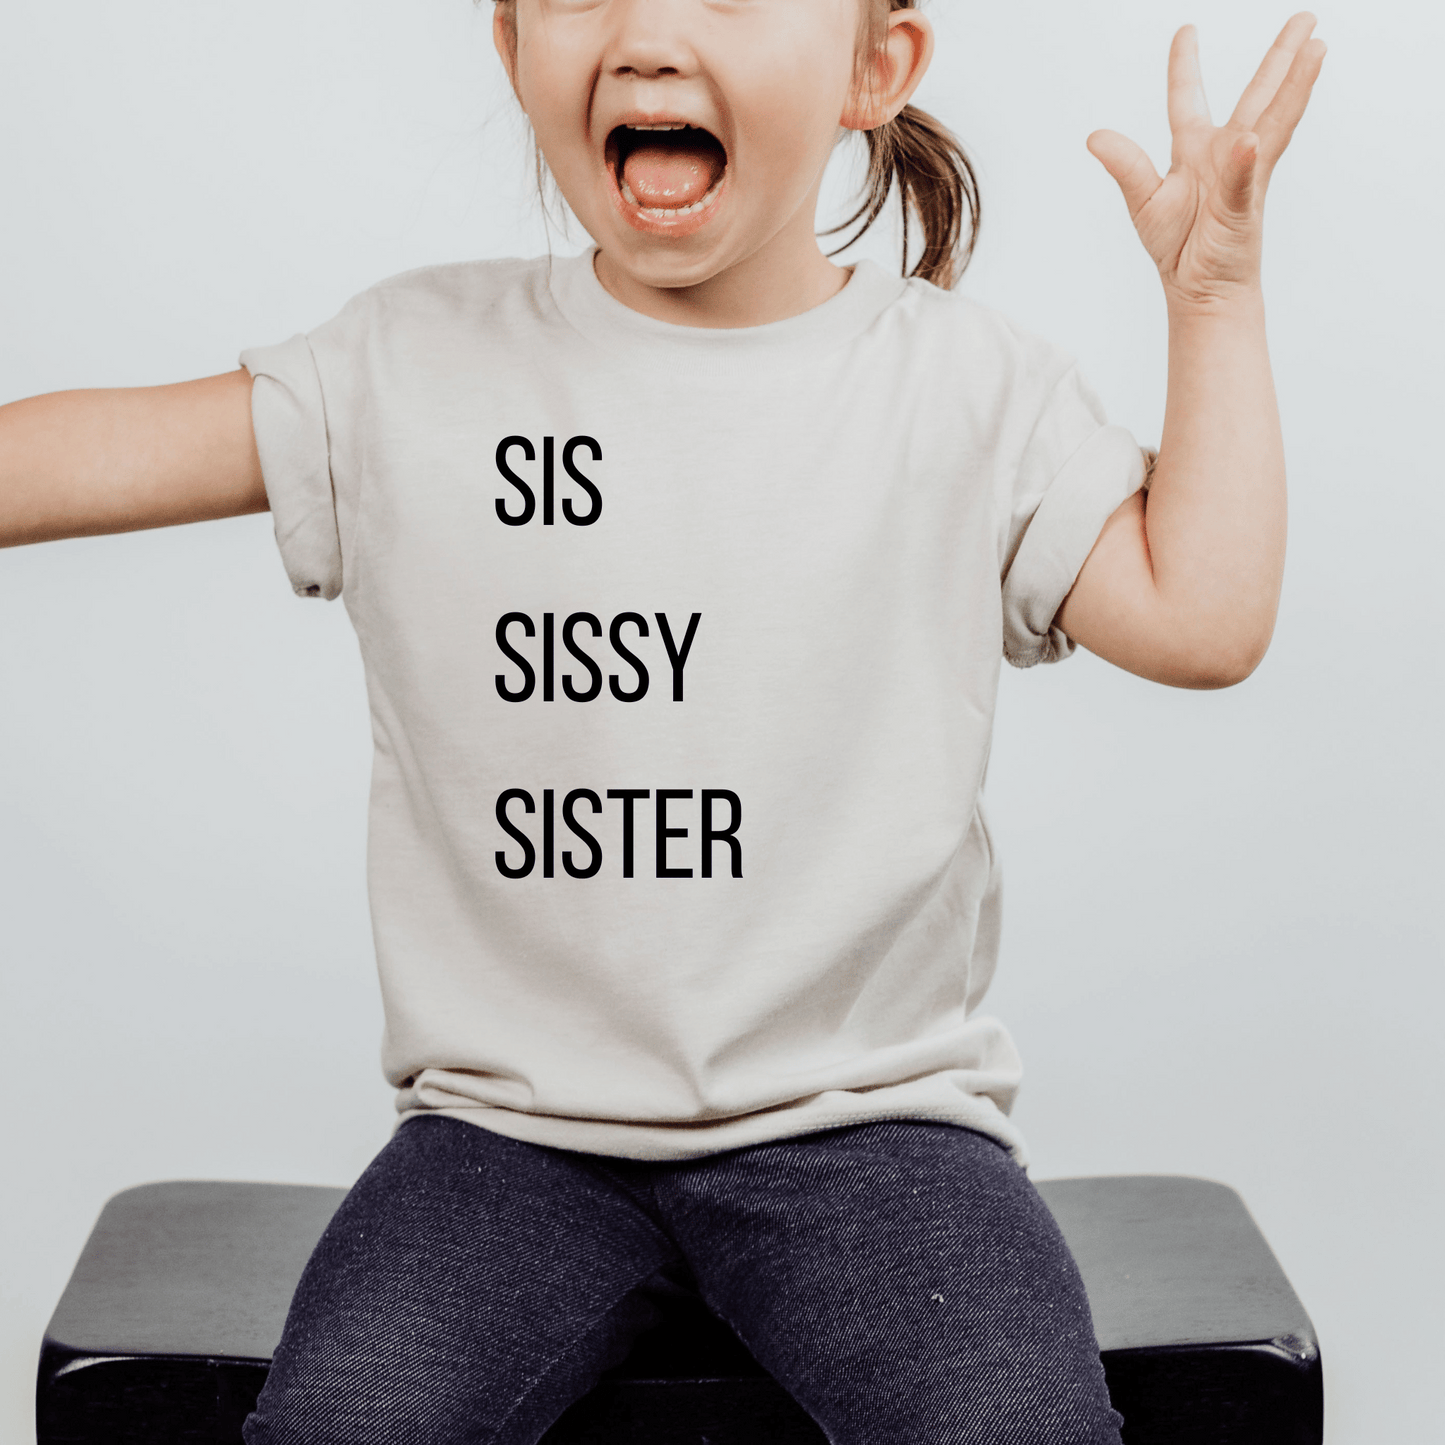 Sis/Sissy/Sister Toddler Graphic Tee | 8 Colors